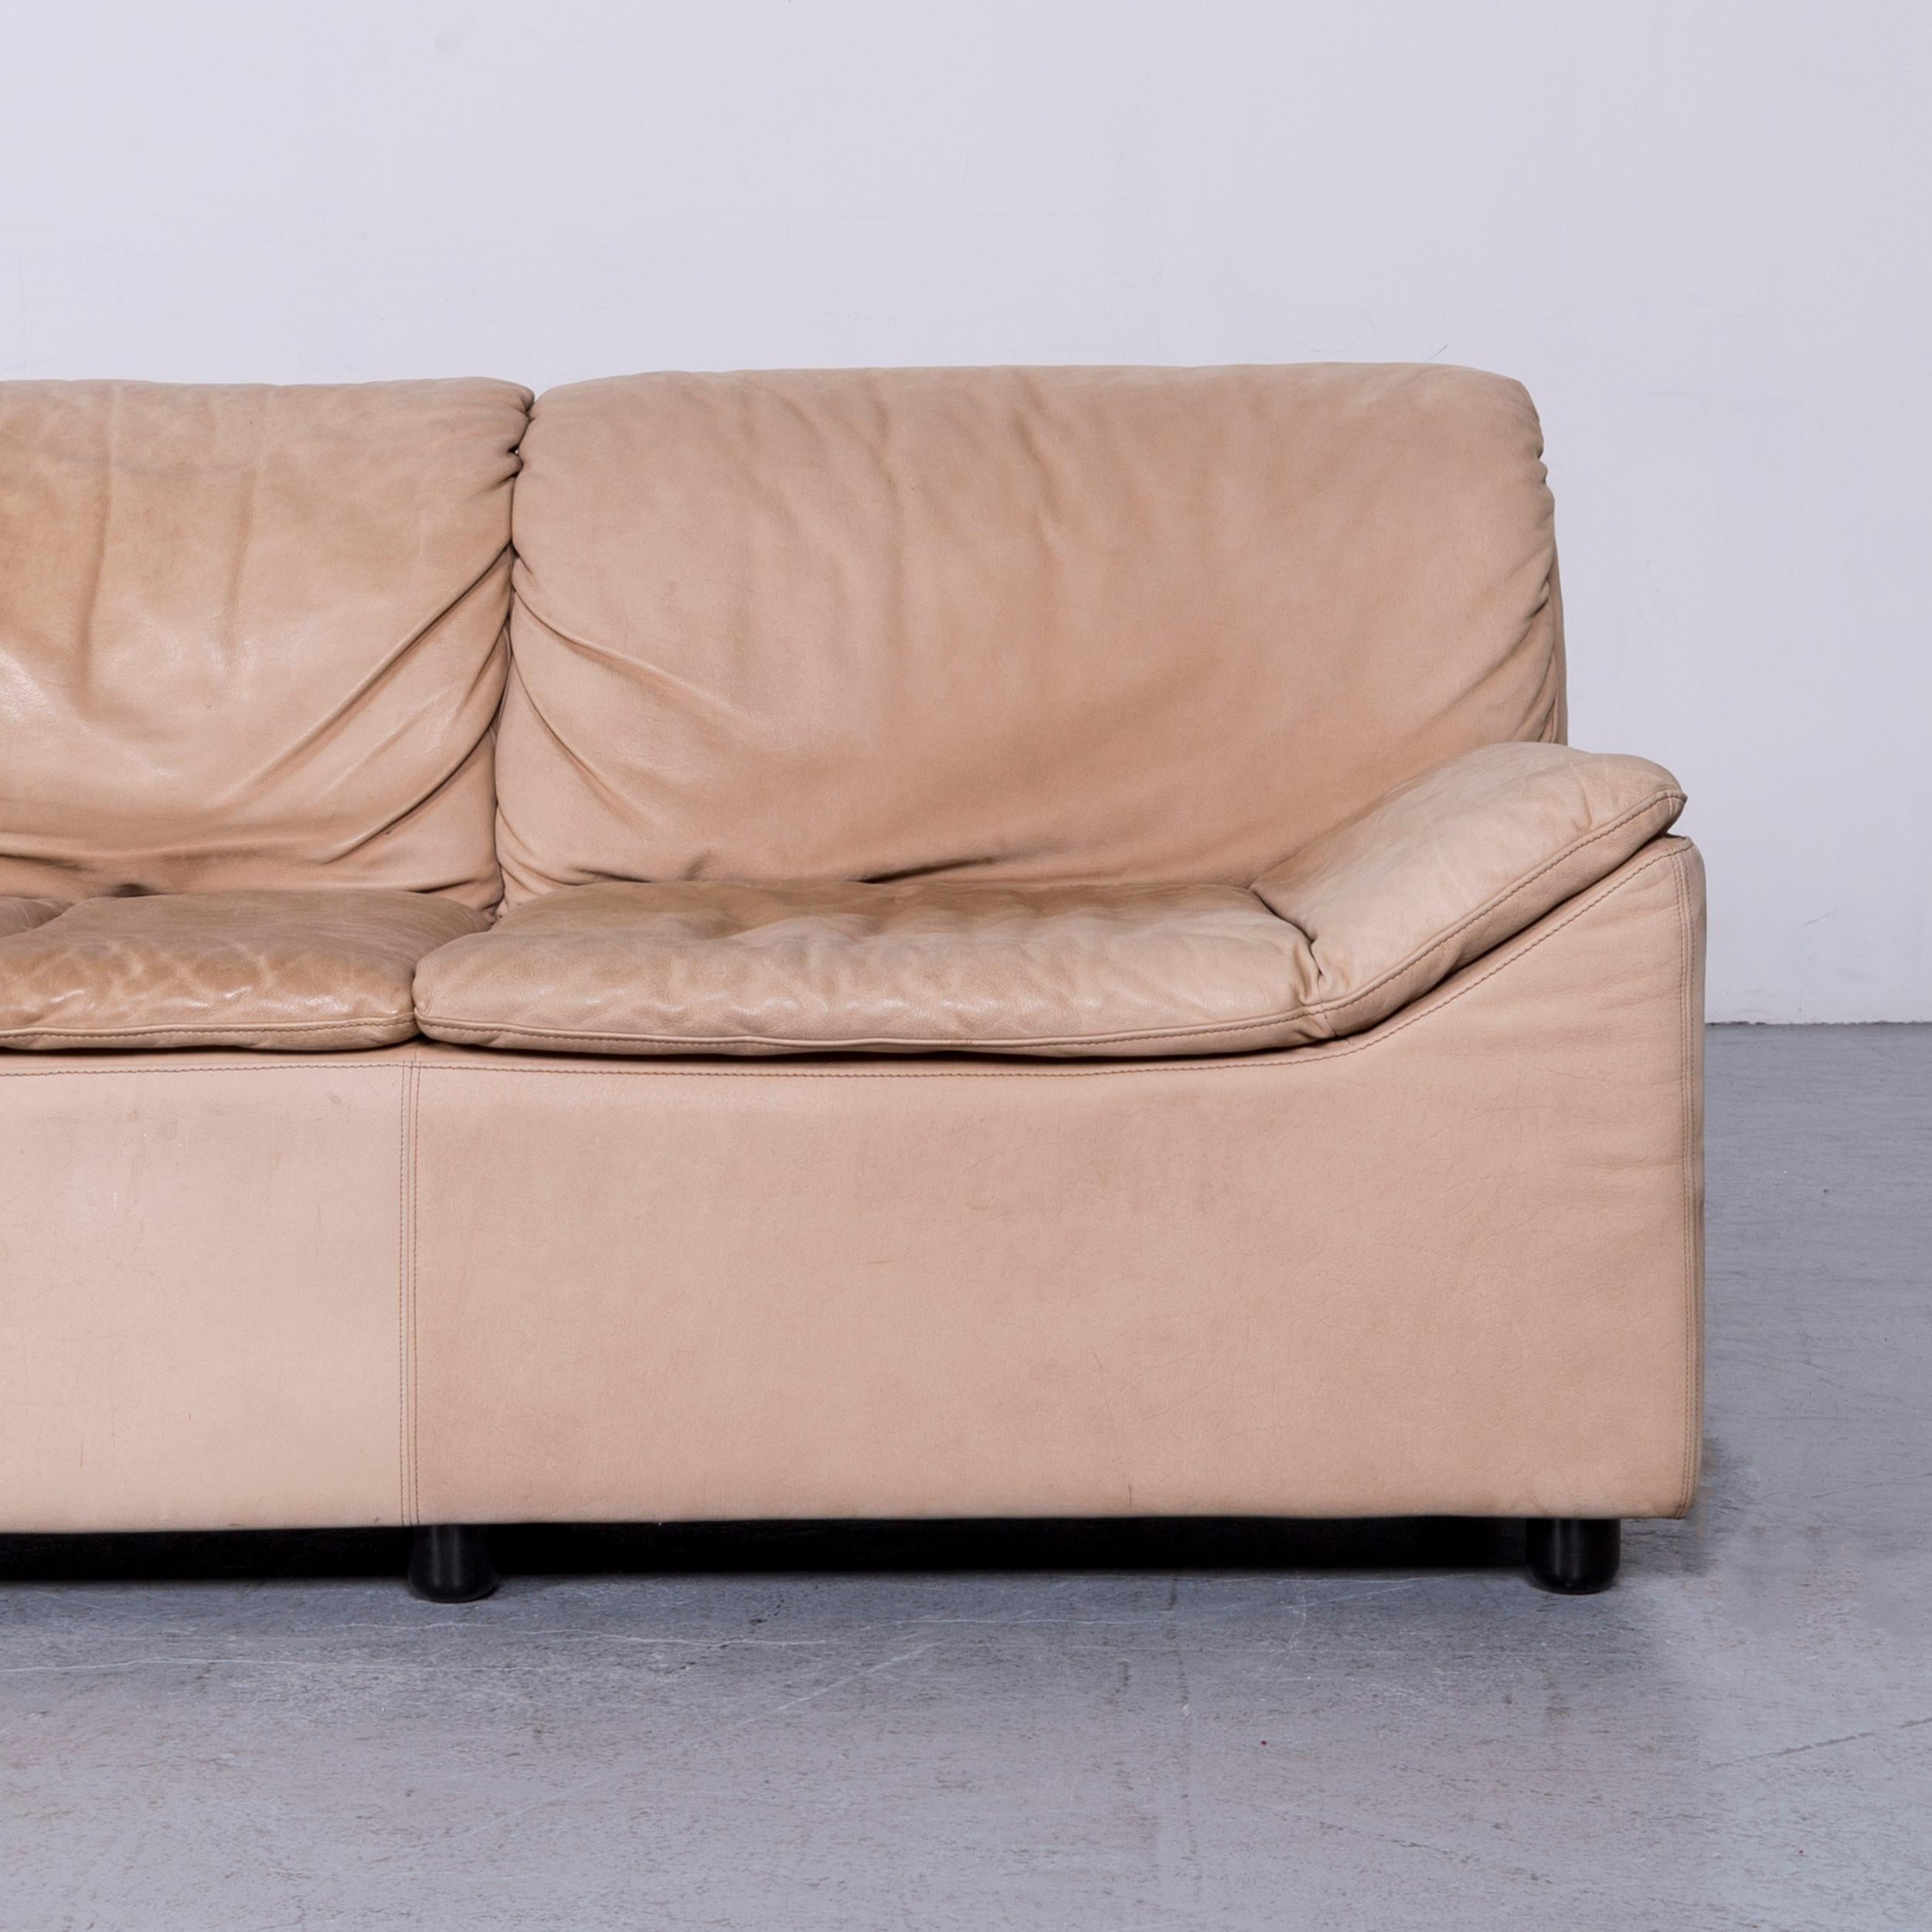 Kill International Golf Designer Sofa Leather Beige Three-Seat Couch from 1984 In Fair Condition For Sale In Cologne, DE